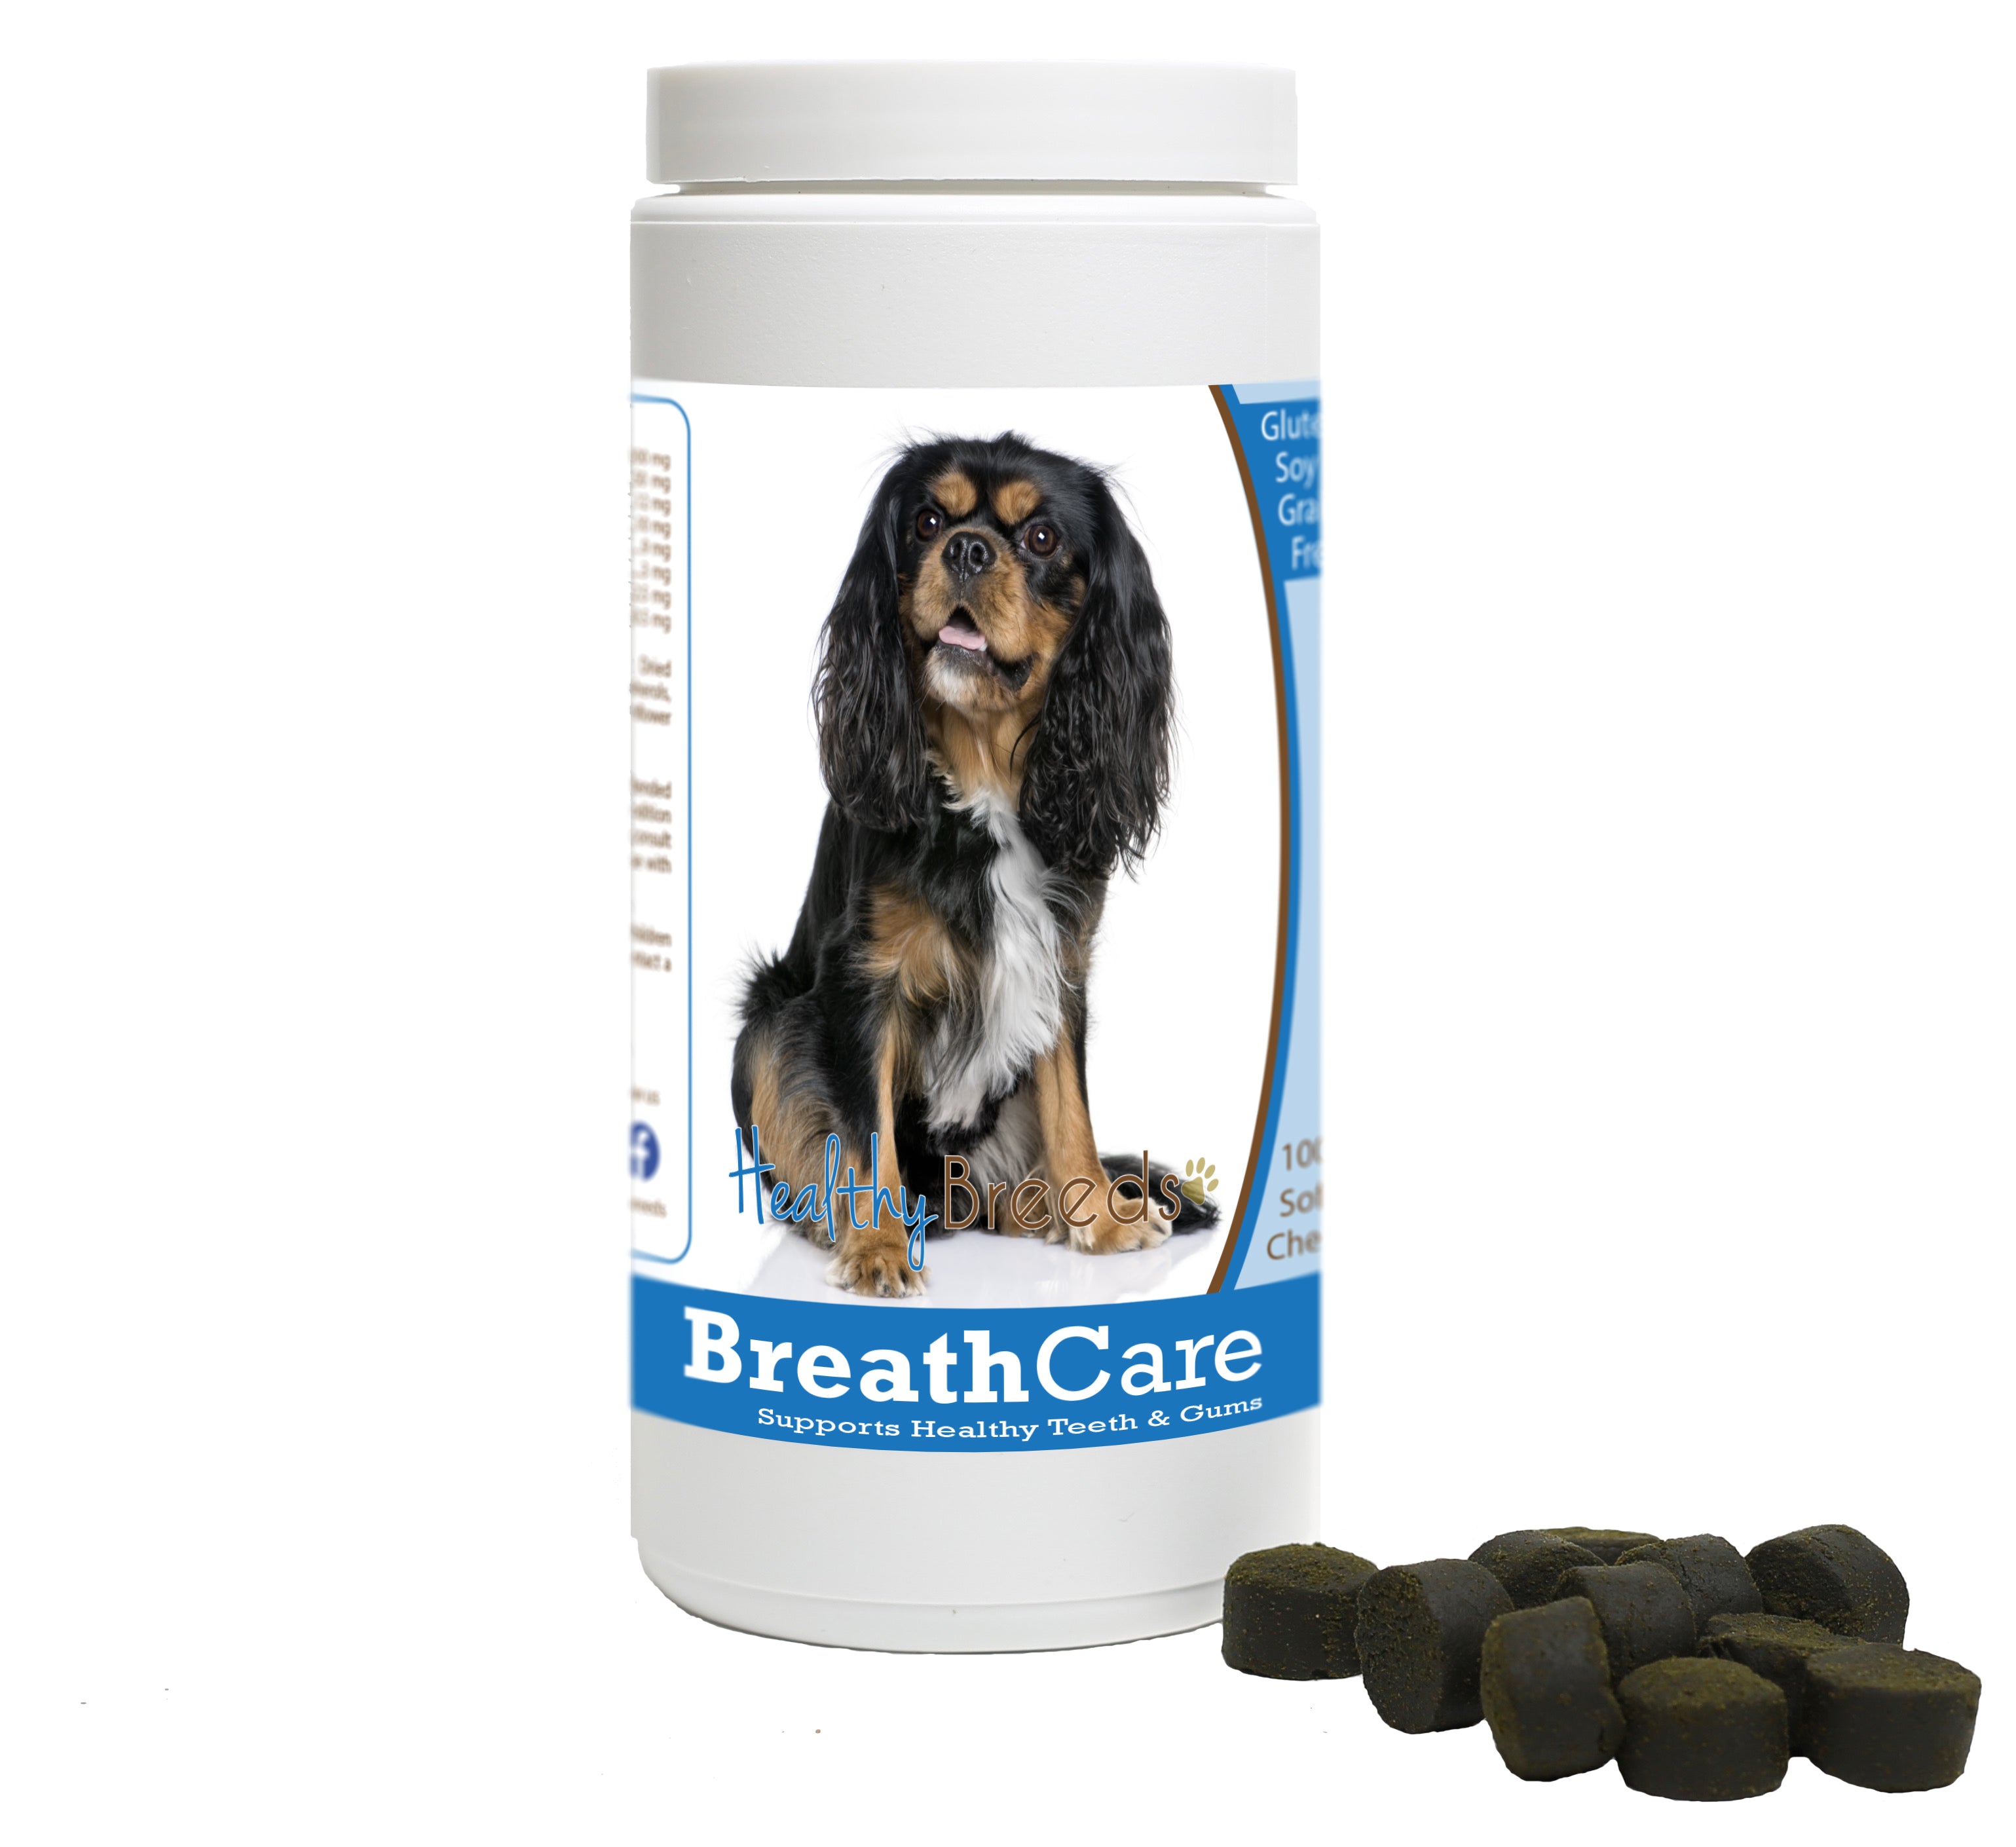 Cavalier King Charles Spaniel Breath Care Soft Chews for Dogs 60 Count